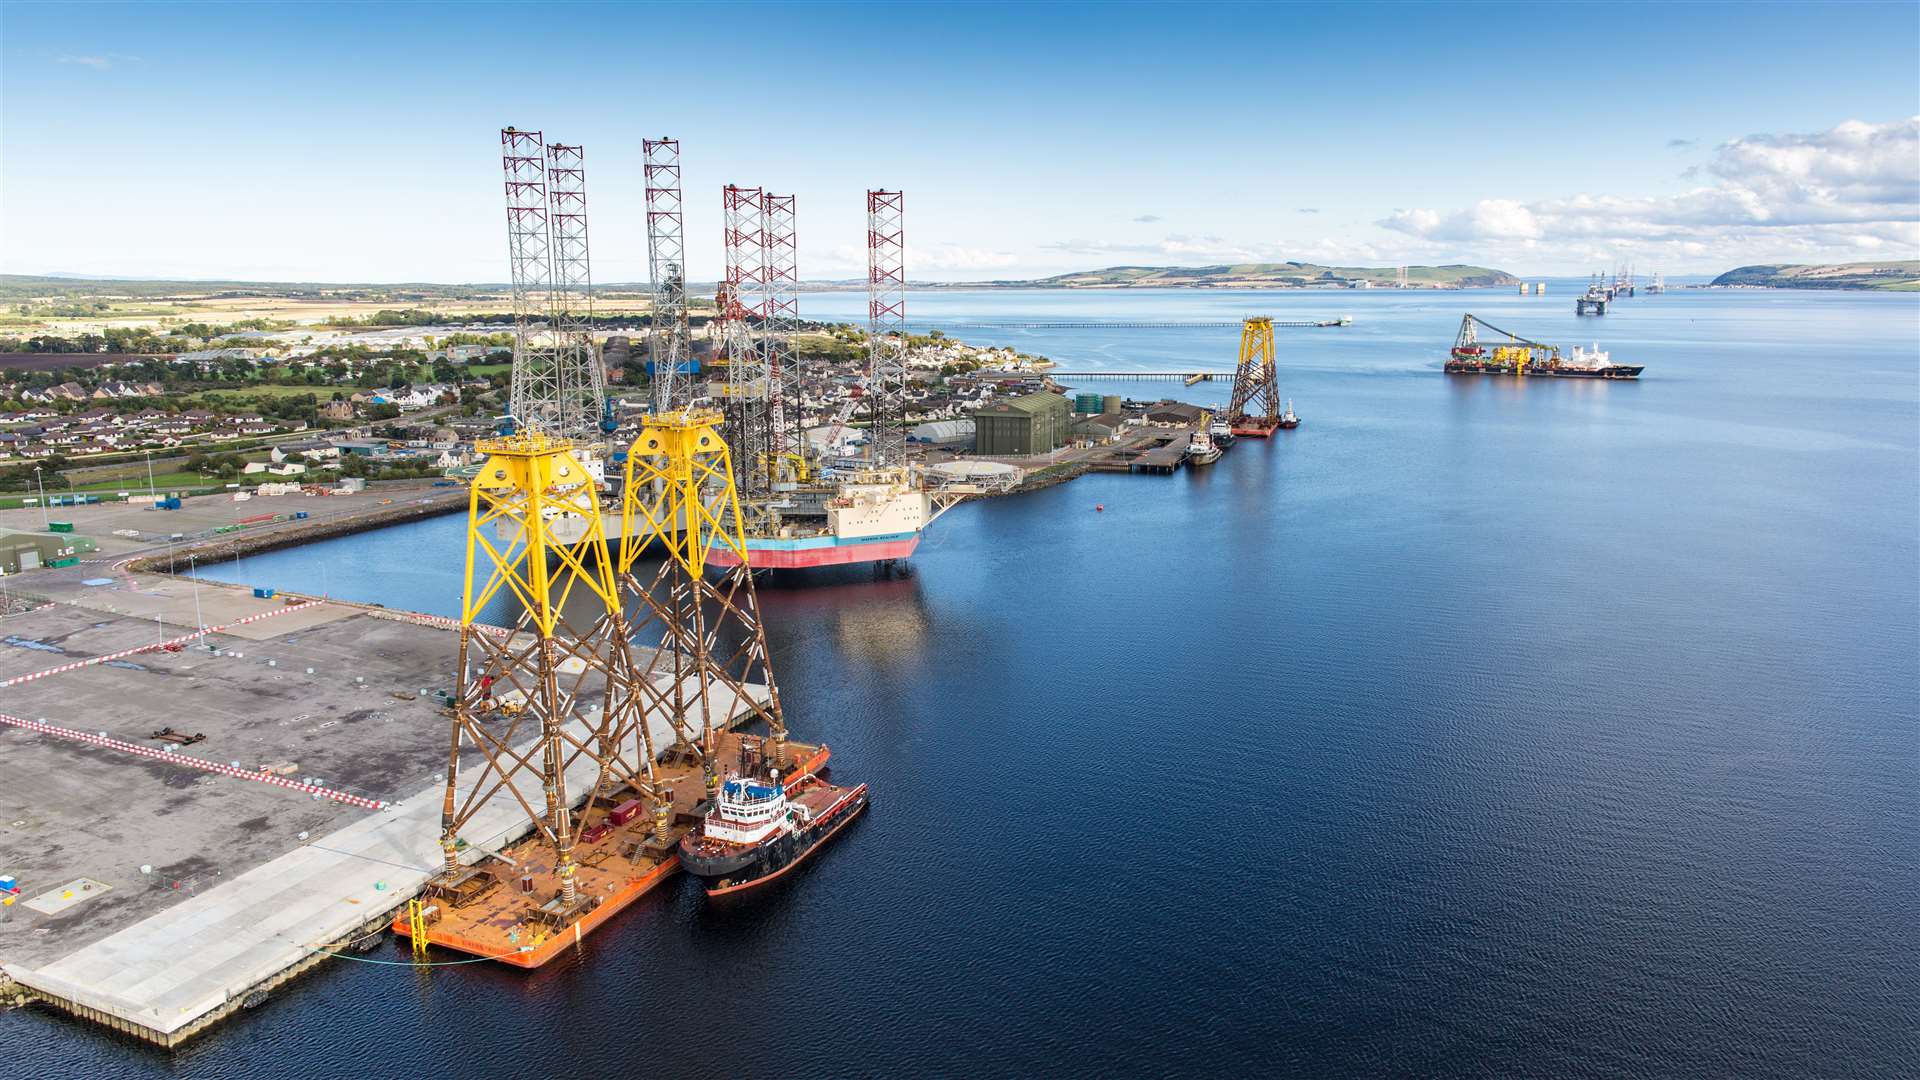 The Port of Cromarty Firth jas announced plans to create a green hyrdogen energy hub.